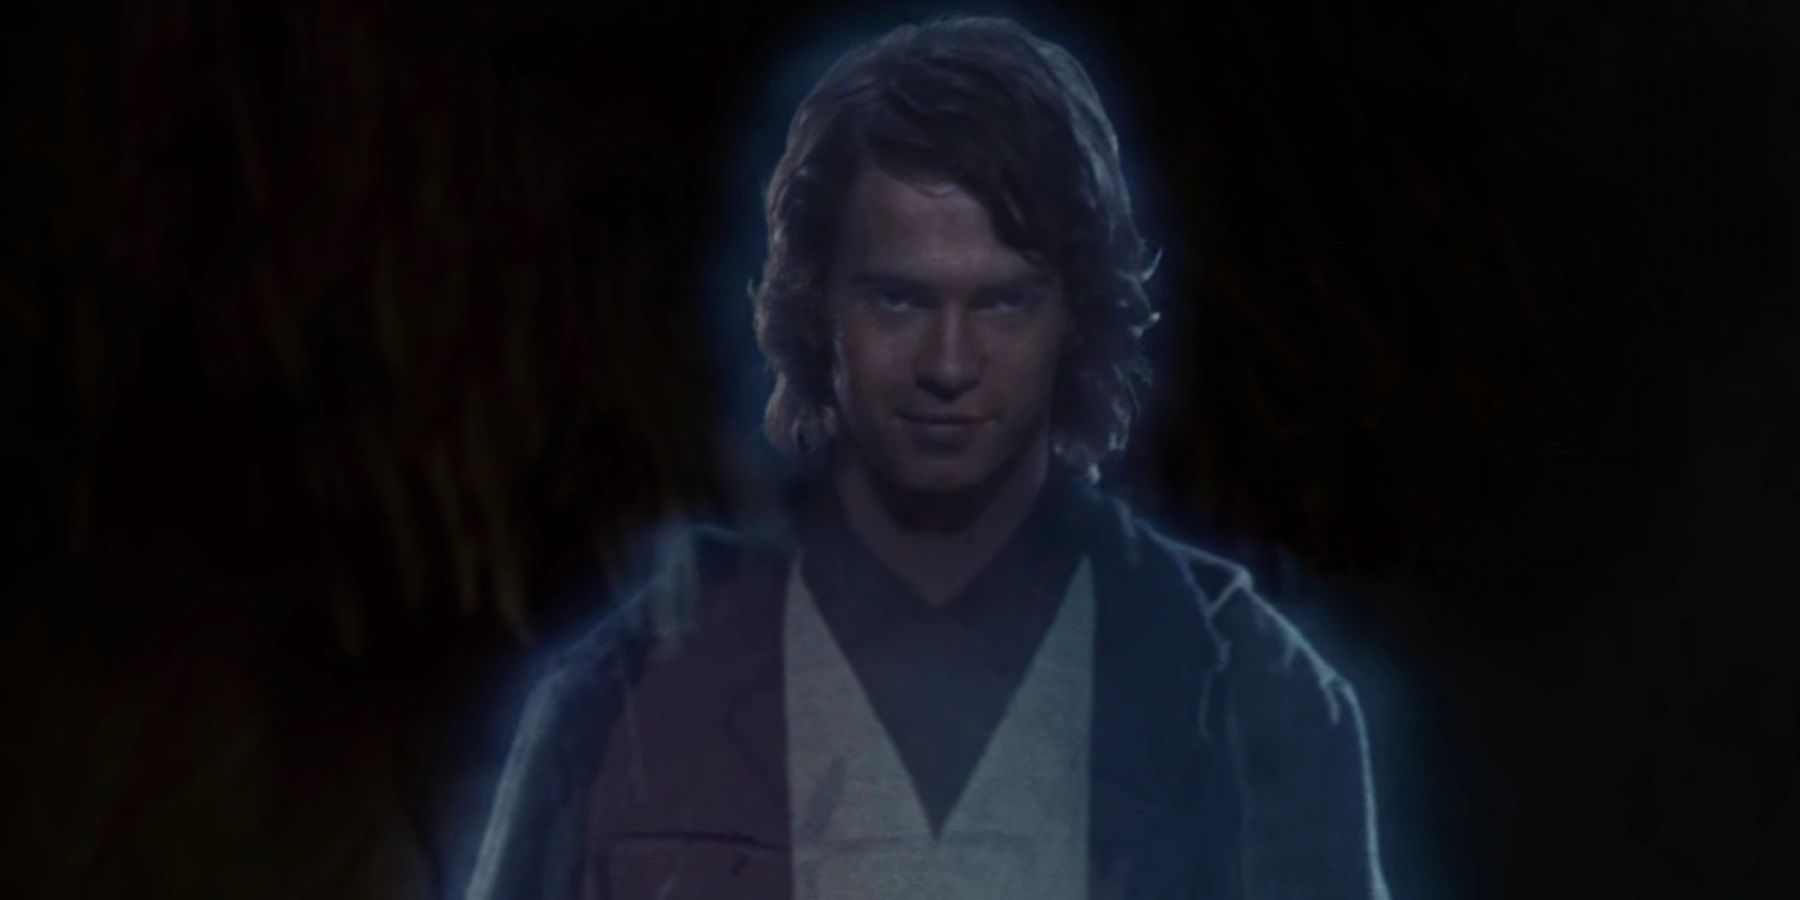 Anakin's Force ghost appears on Endor in Star Wars Return Of The Jedi